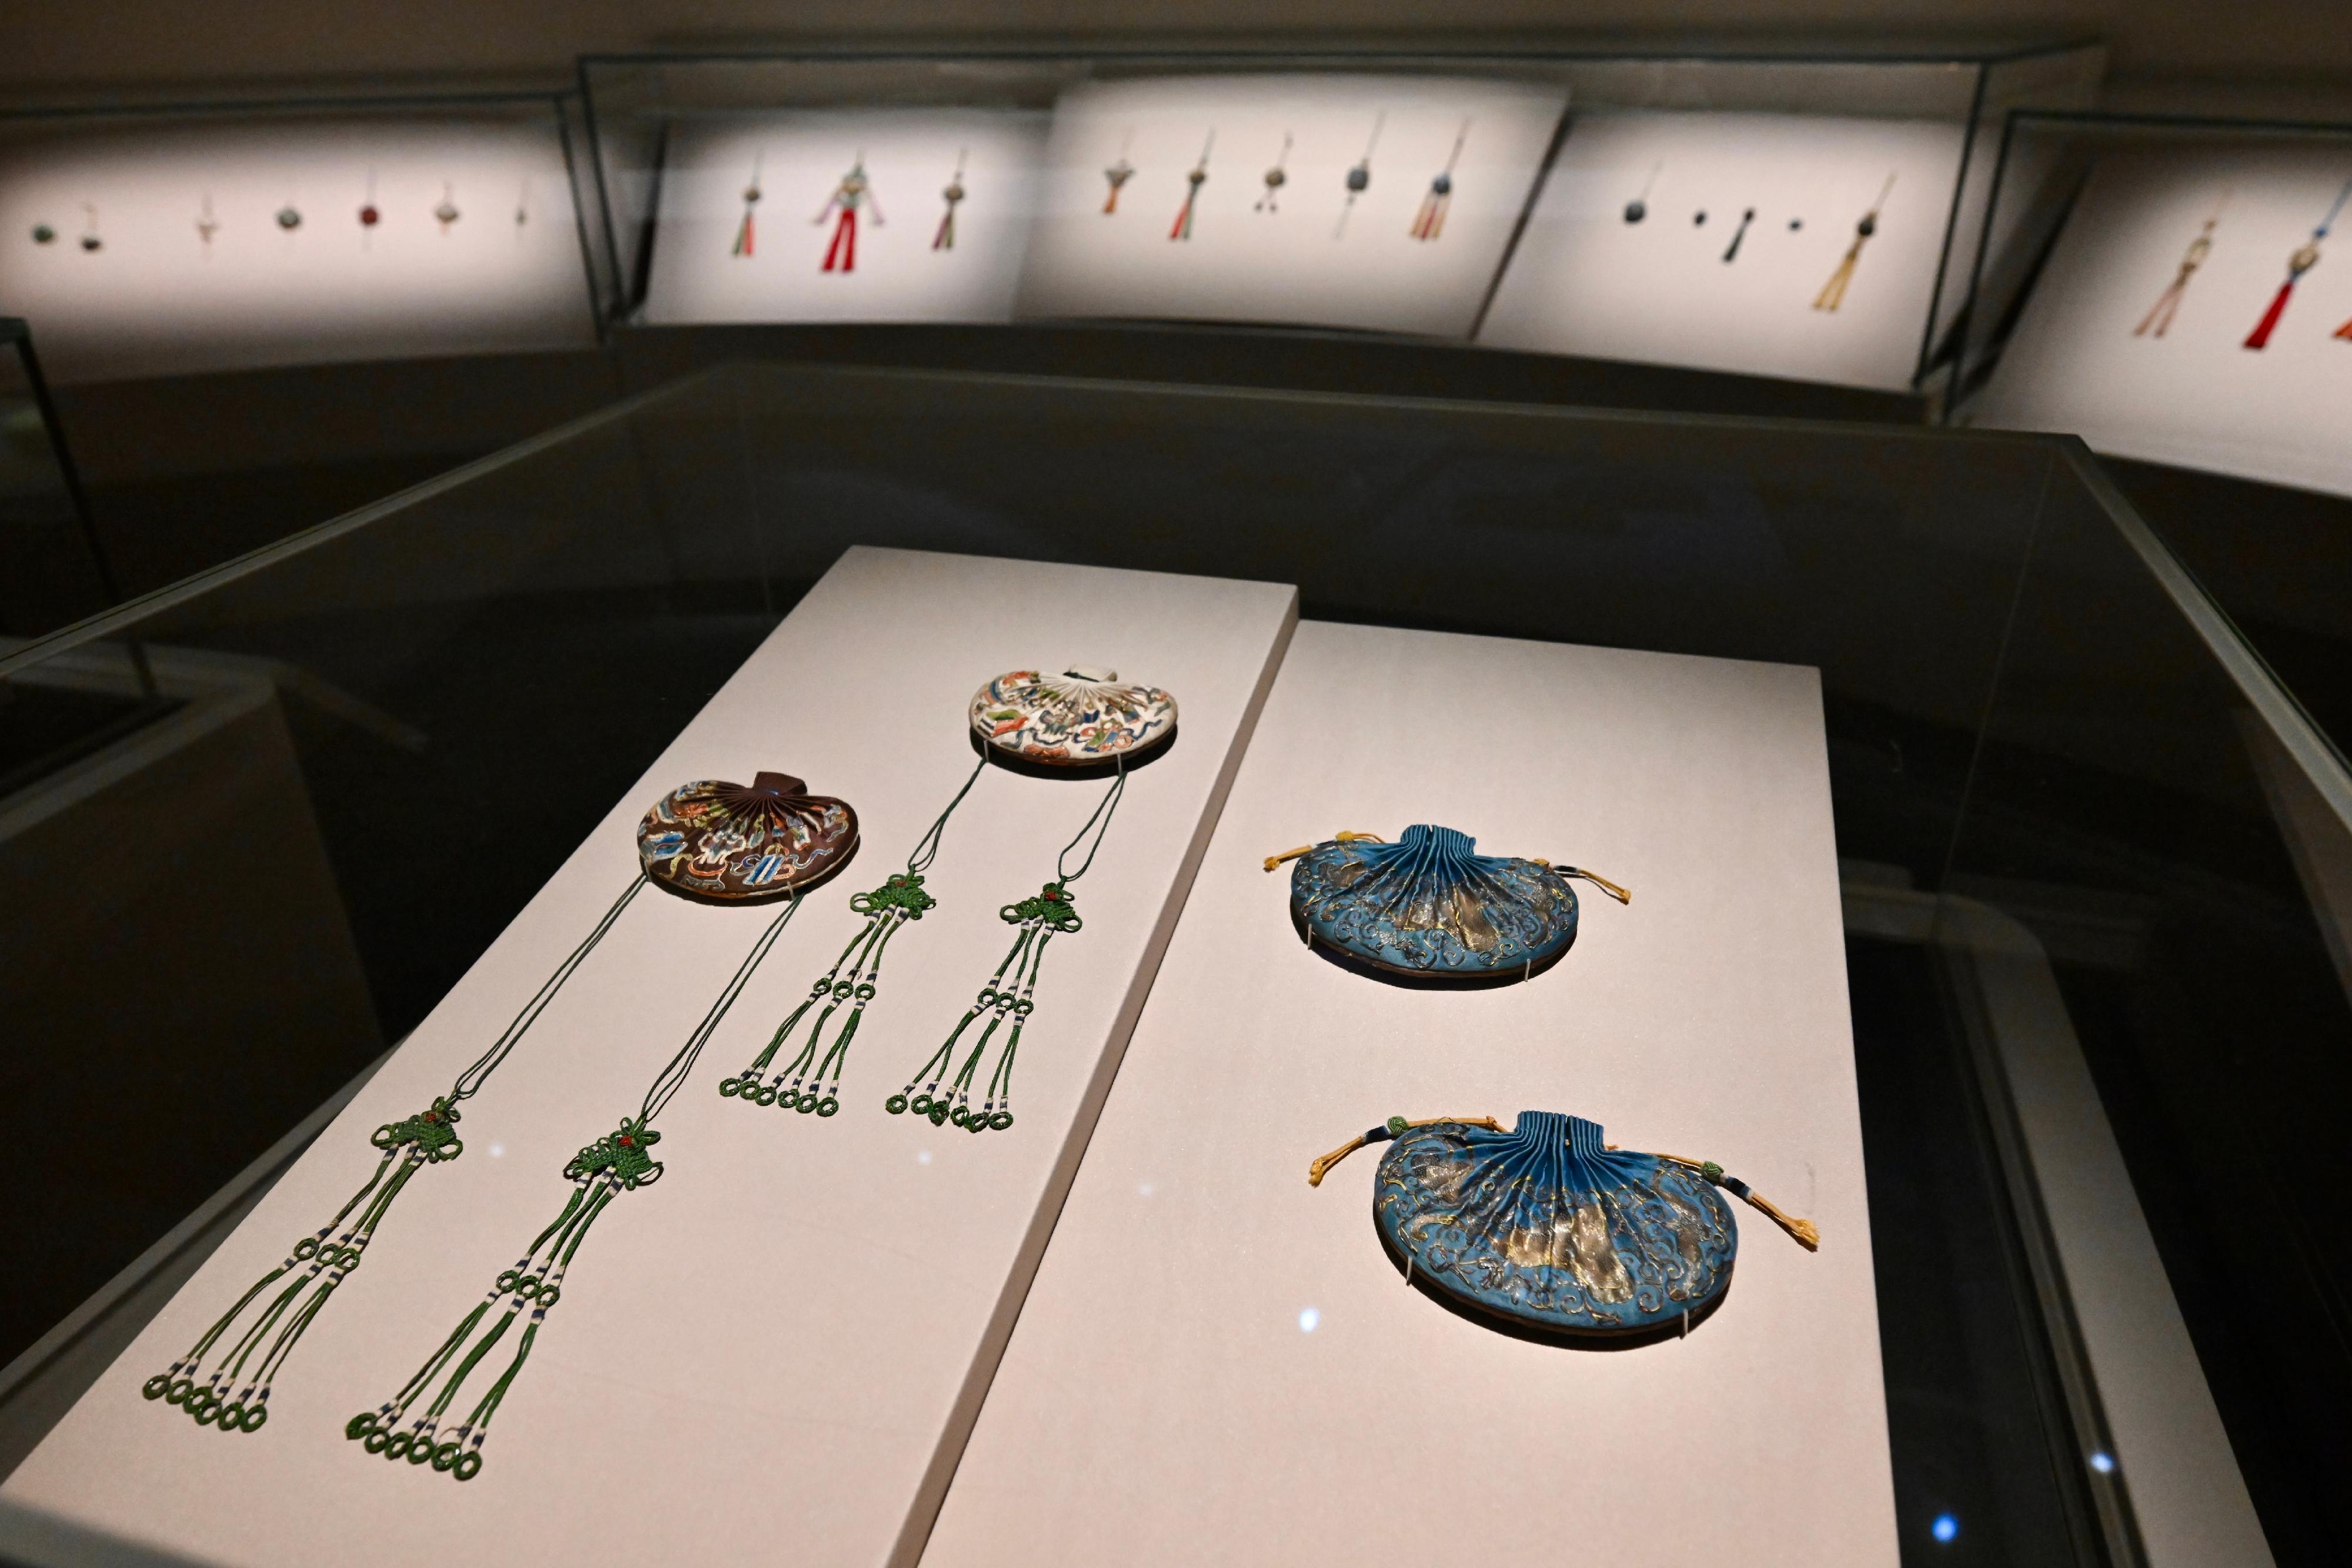 The opening ceremony of the "The Hong Kong Jockey Club Series: Fragrance of Time - In Search of Chinese Art of Scent" exhibition was held today (June 27) at the Hong Kong Museum of Art (HKMoA). Photo shows Qing dynasty sachets made of diverse materials from the HKMoA collection.
